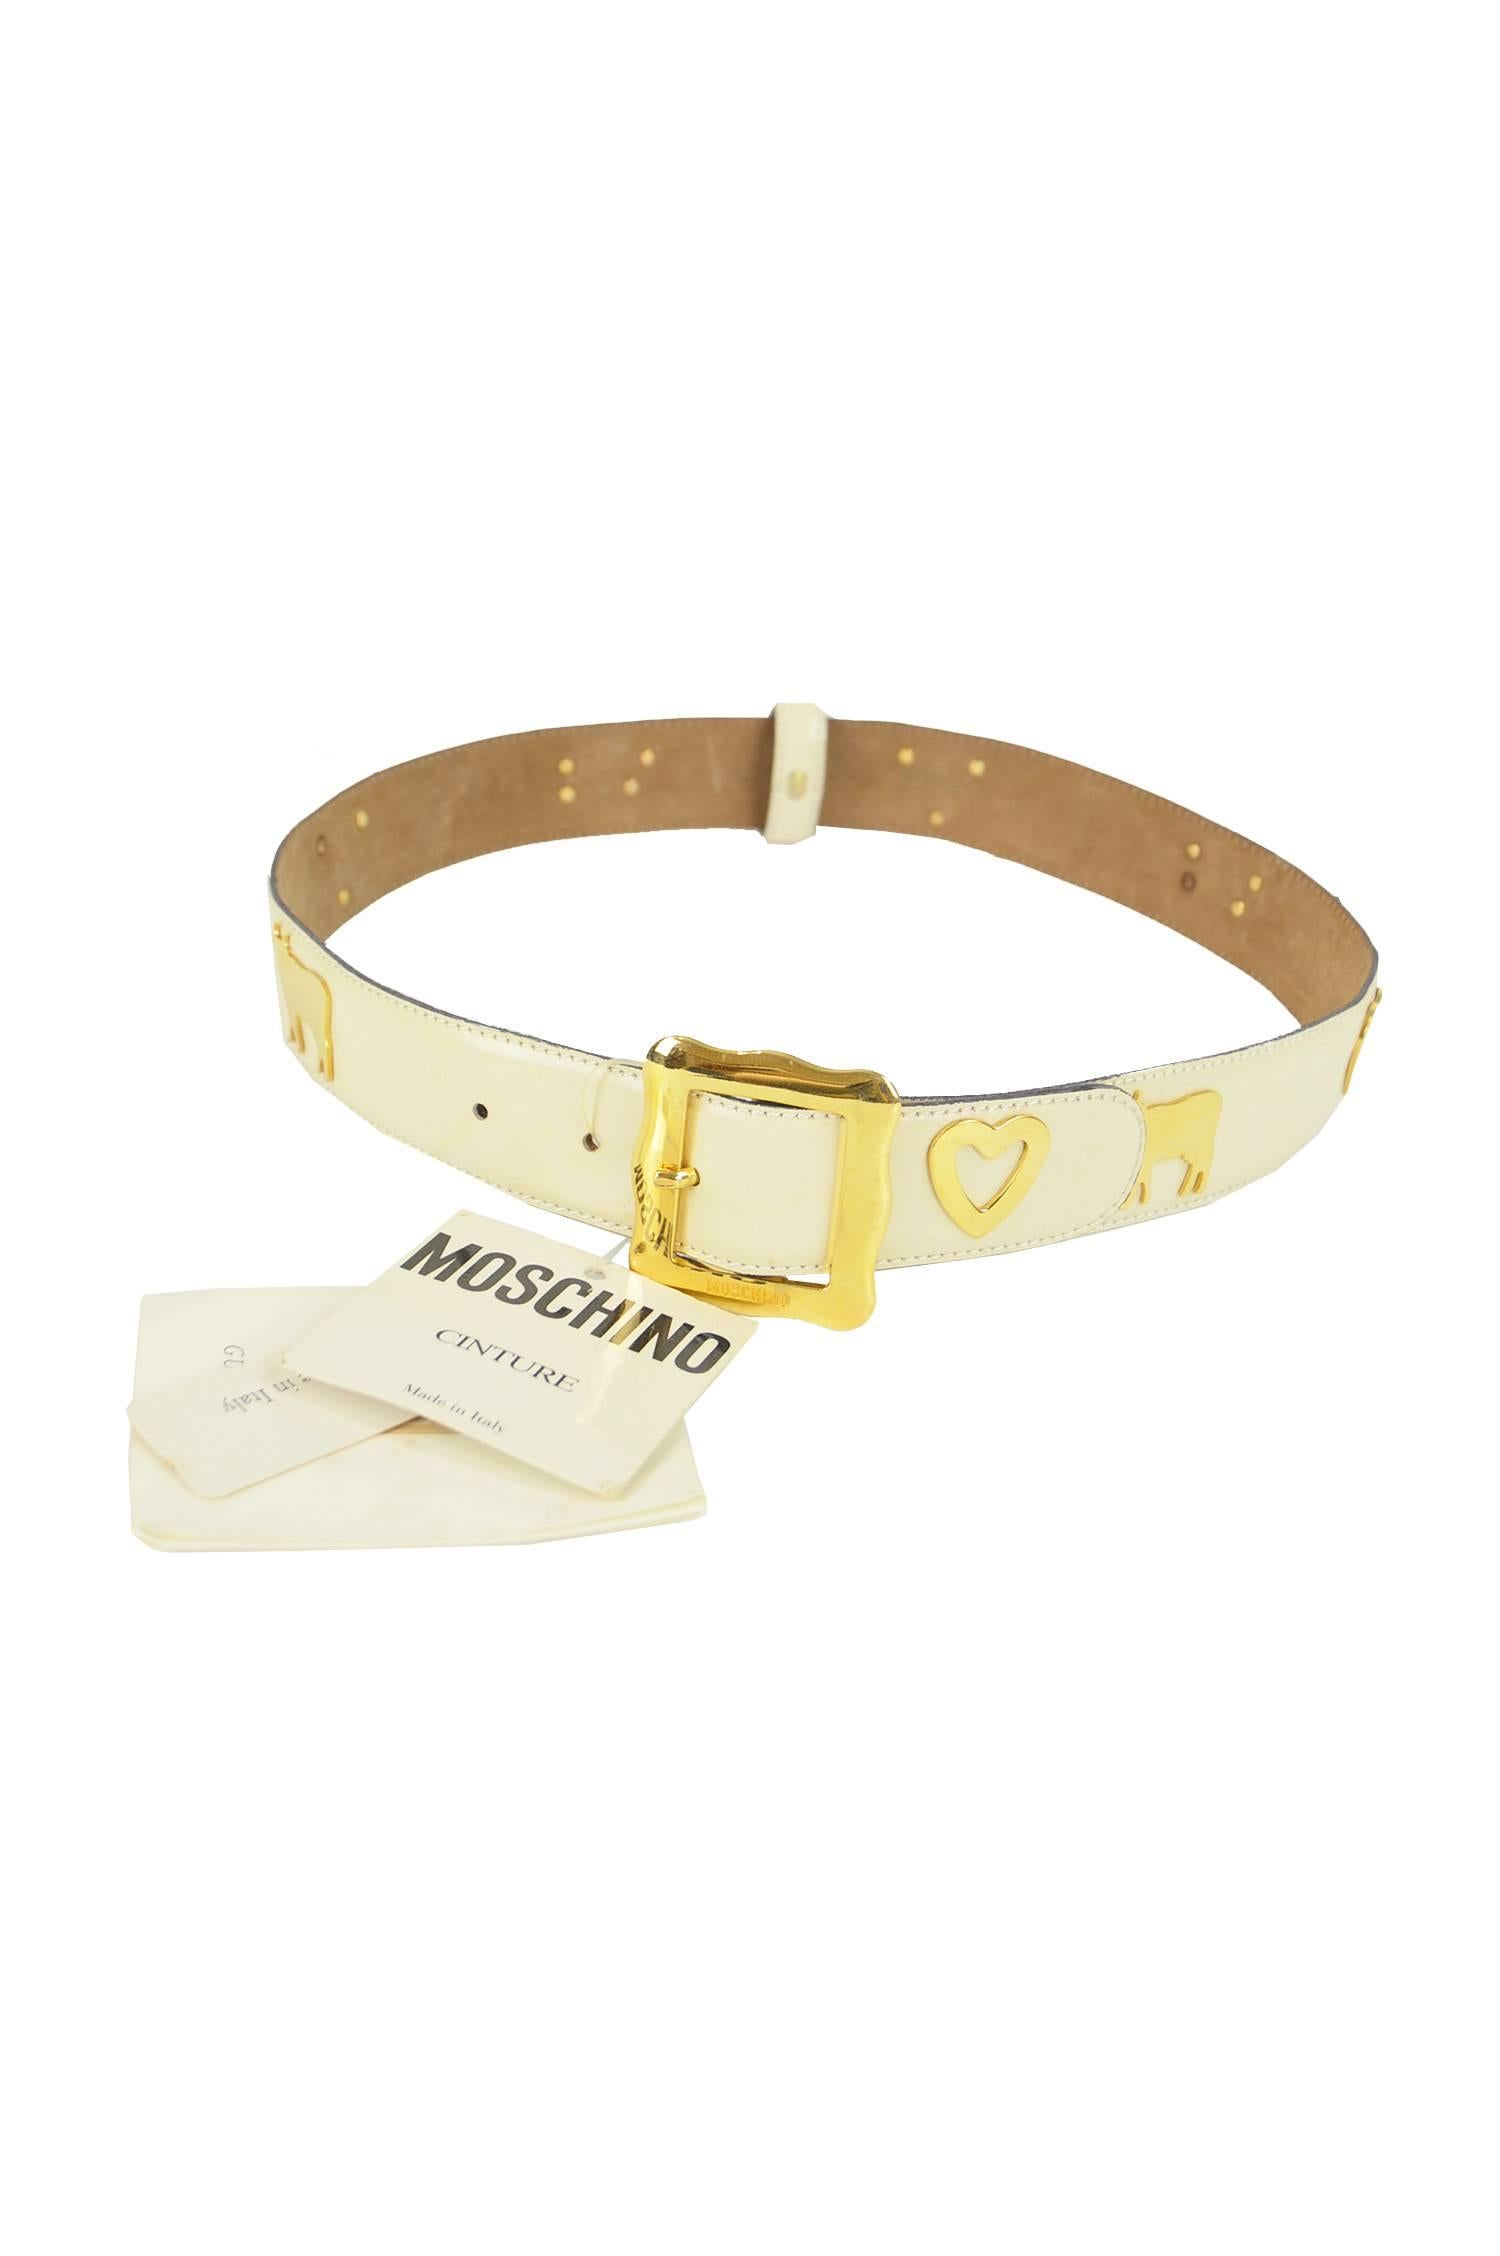 Moschino Vintage Leather Belt In Excellent Condition For Sale In Doncaster, South Yorkshire